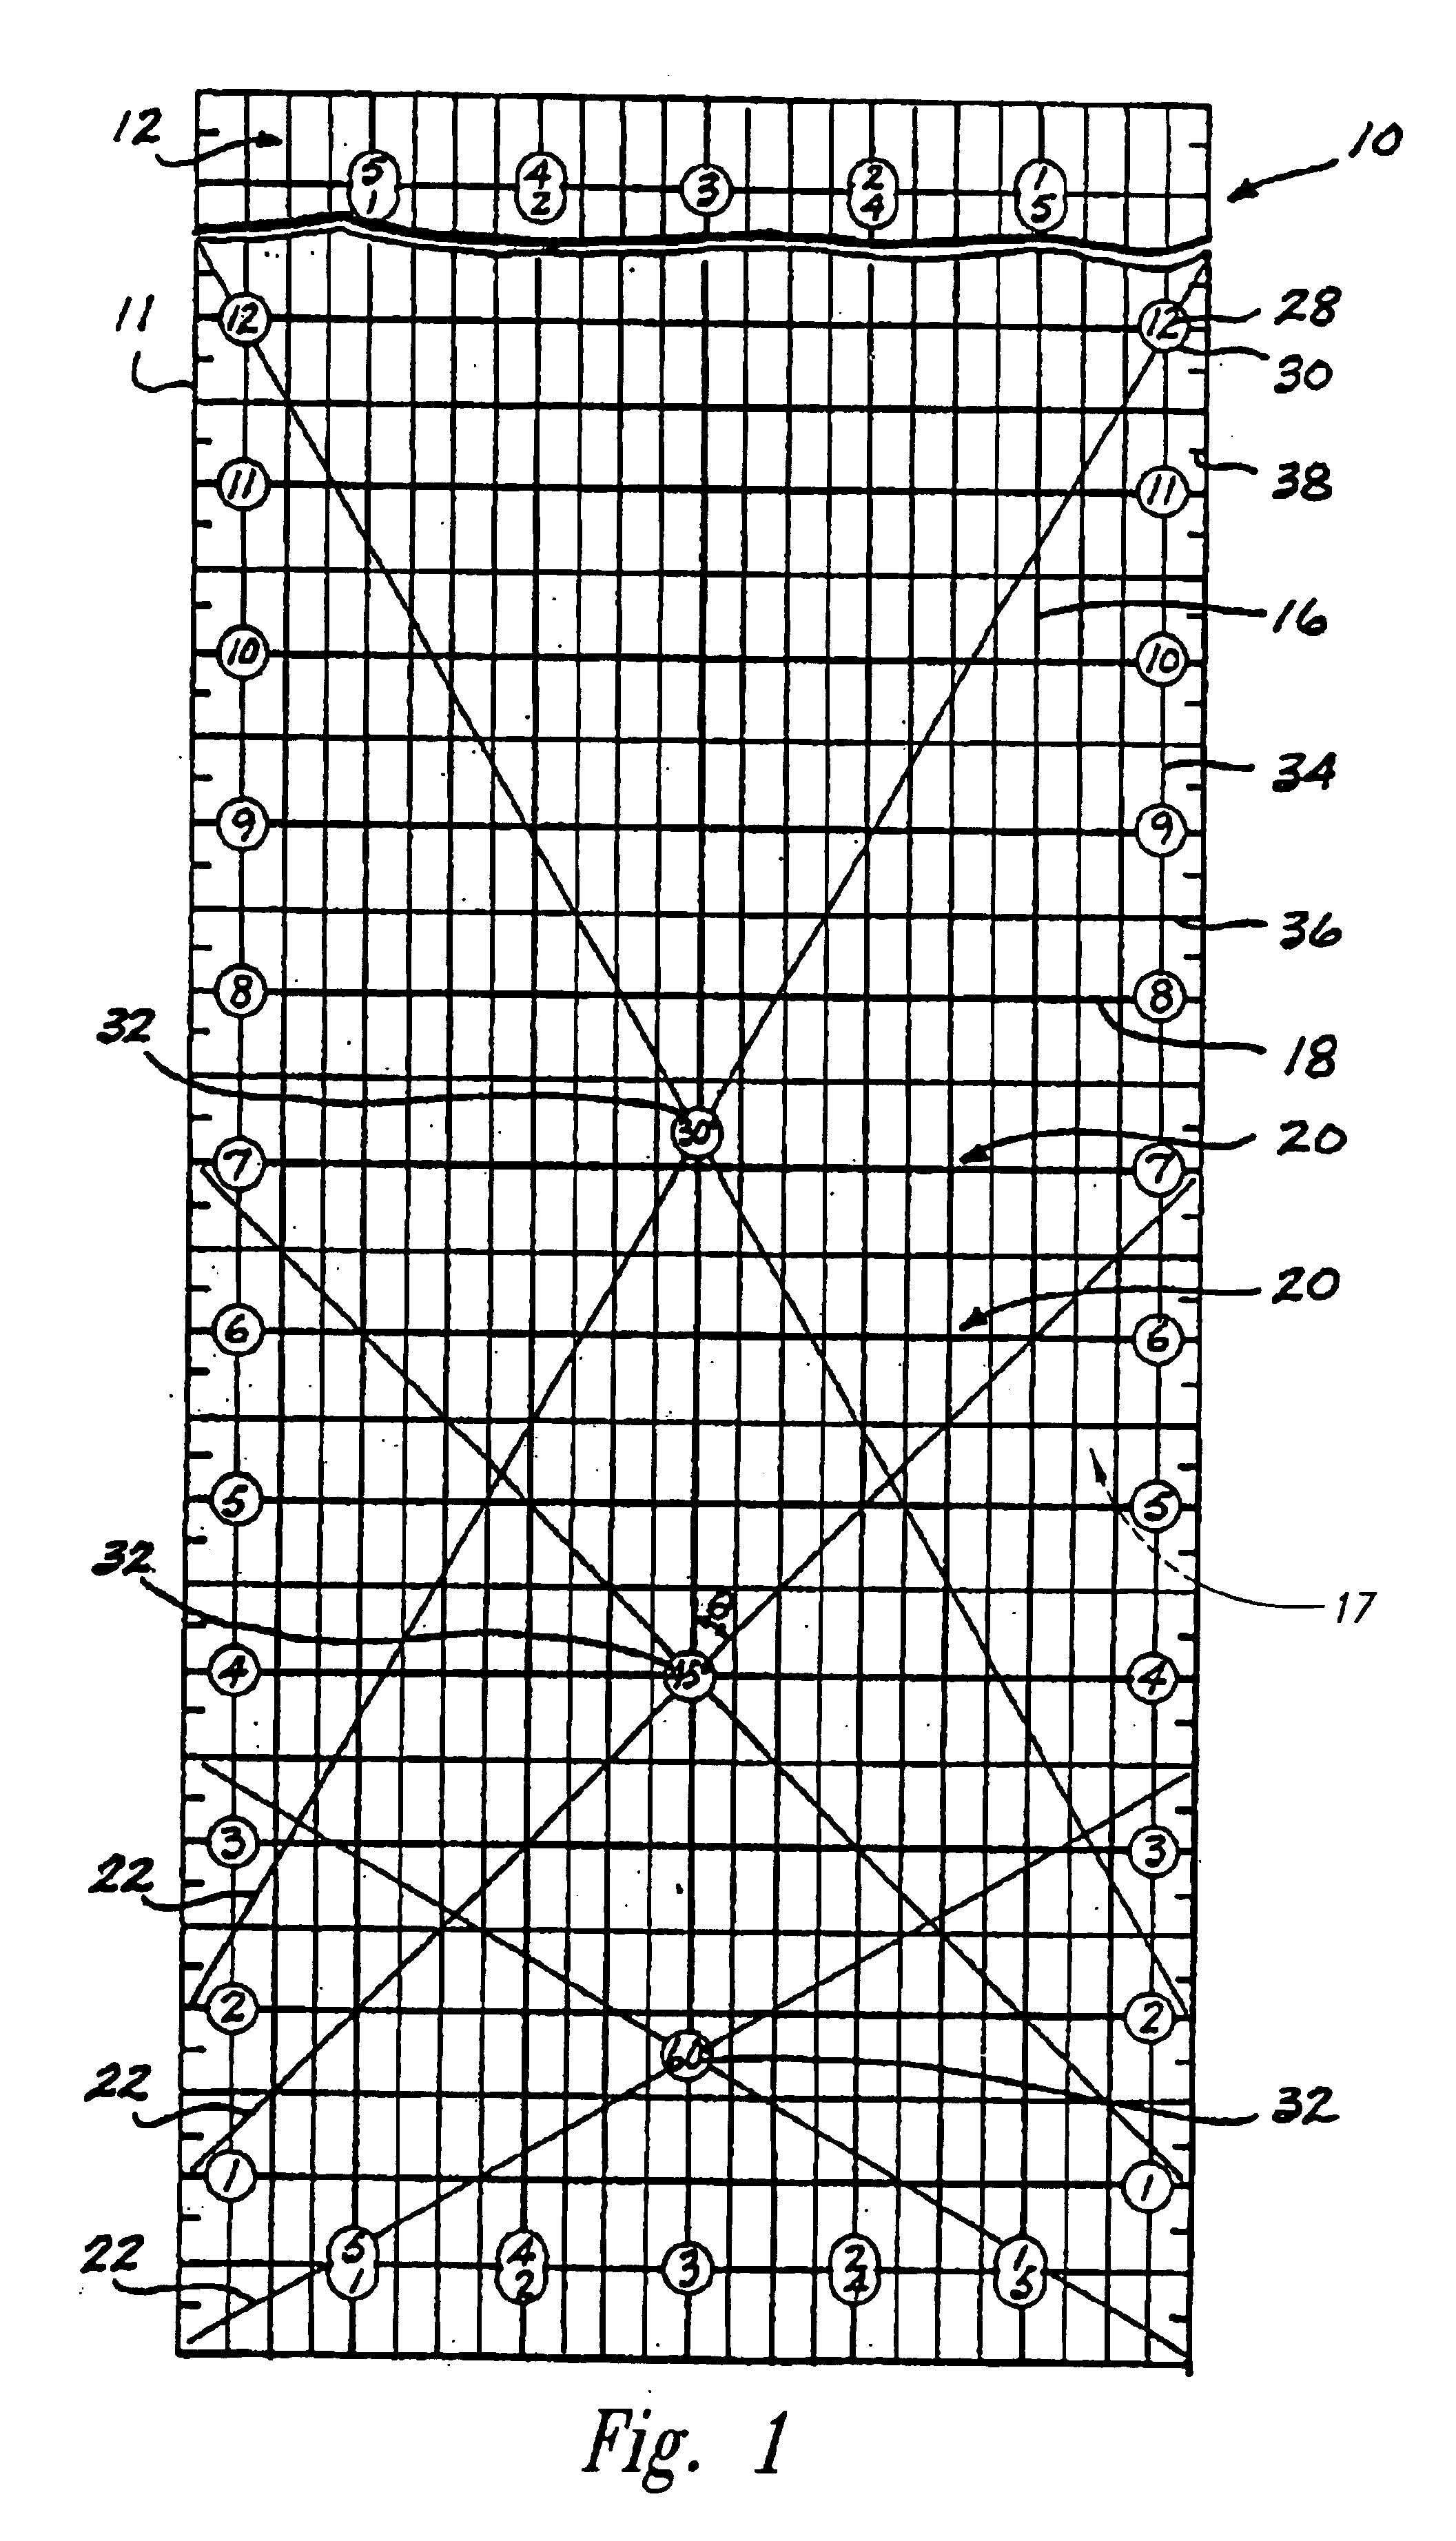 Measuring tool and method of making